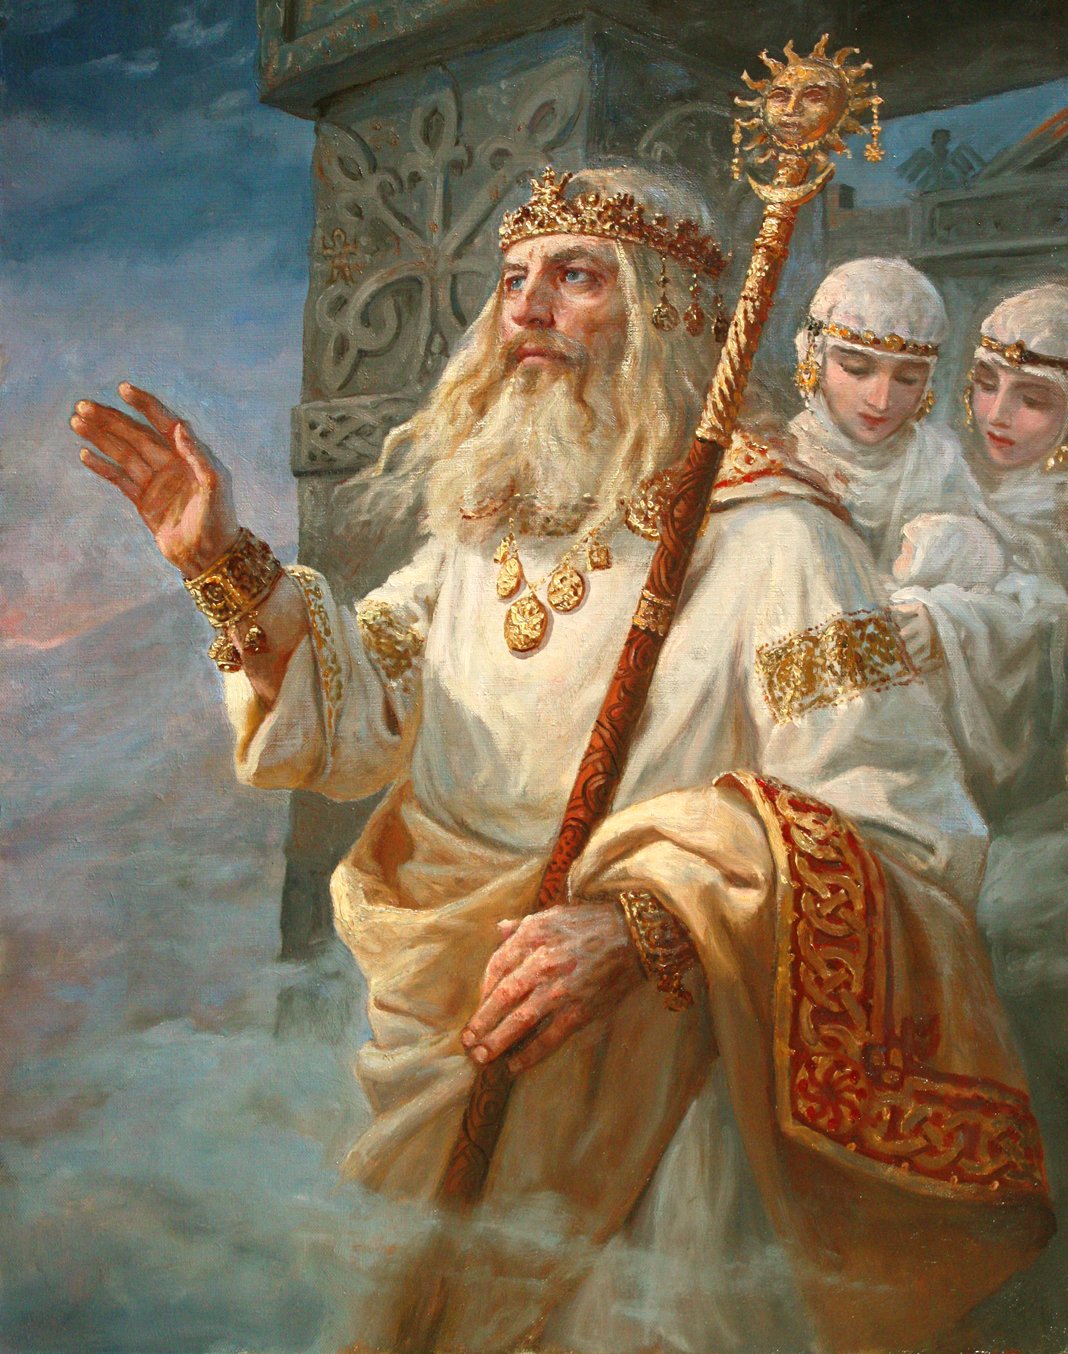 A painting depicting the Slavic deity Rod with a sun staff in his hand. He is wearing a golden crown. There are two women with a baby behind him.